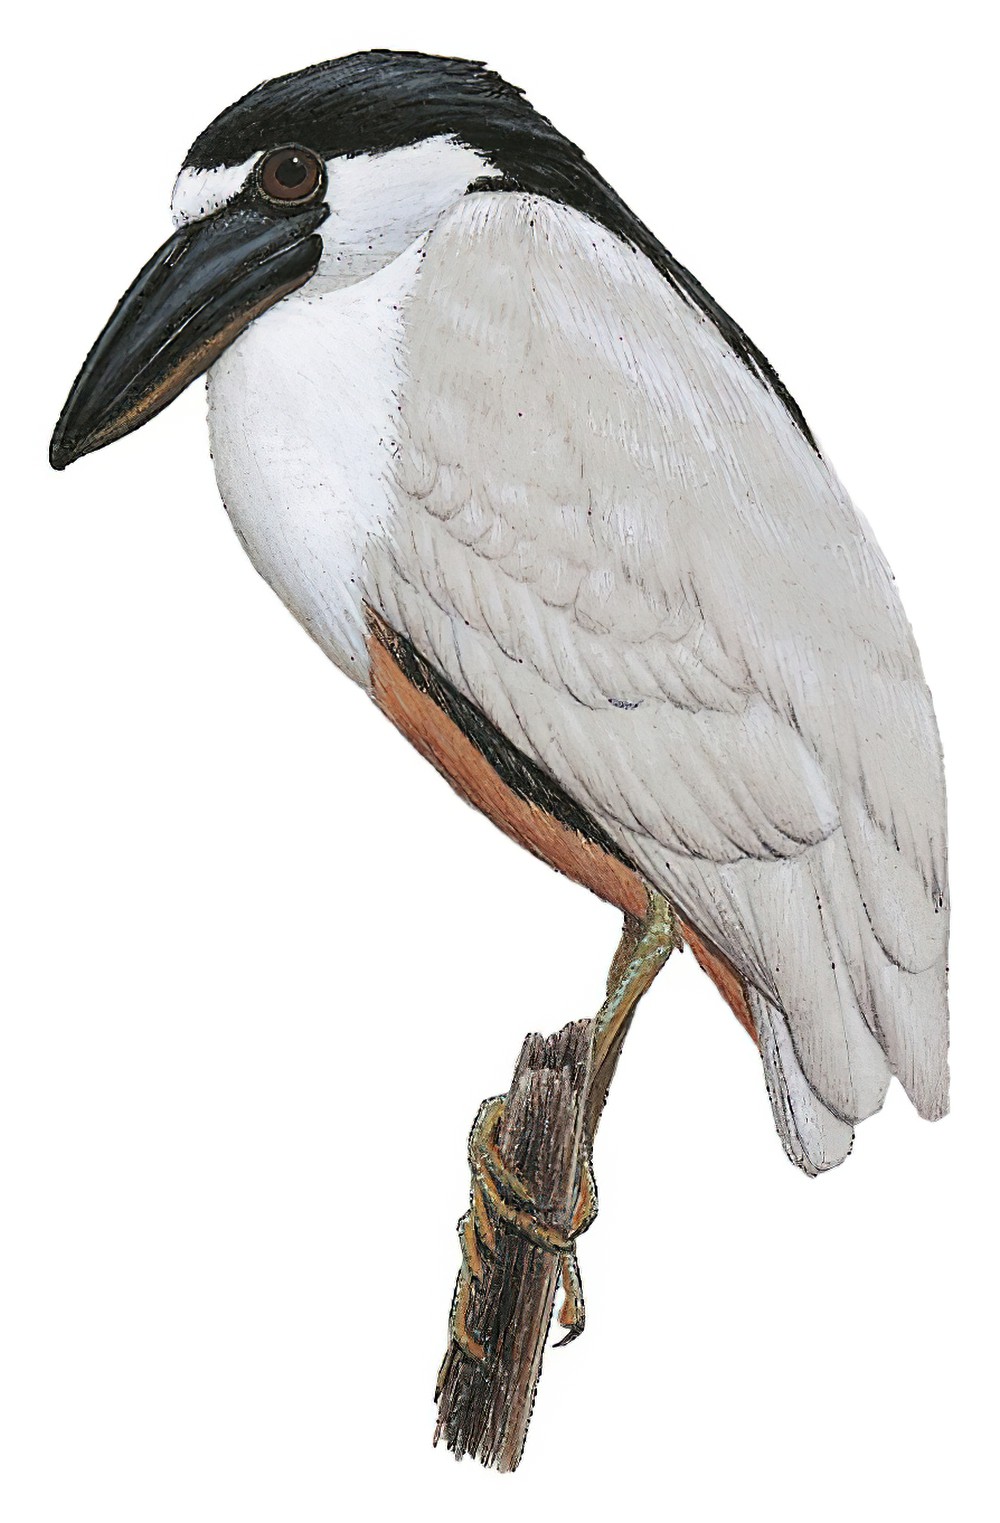 Boat-billed Heron / Cochlearius cochlearius